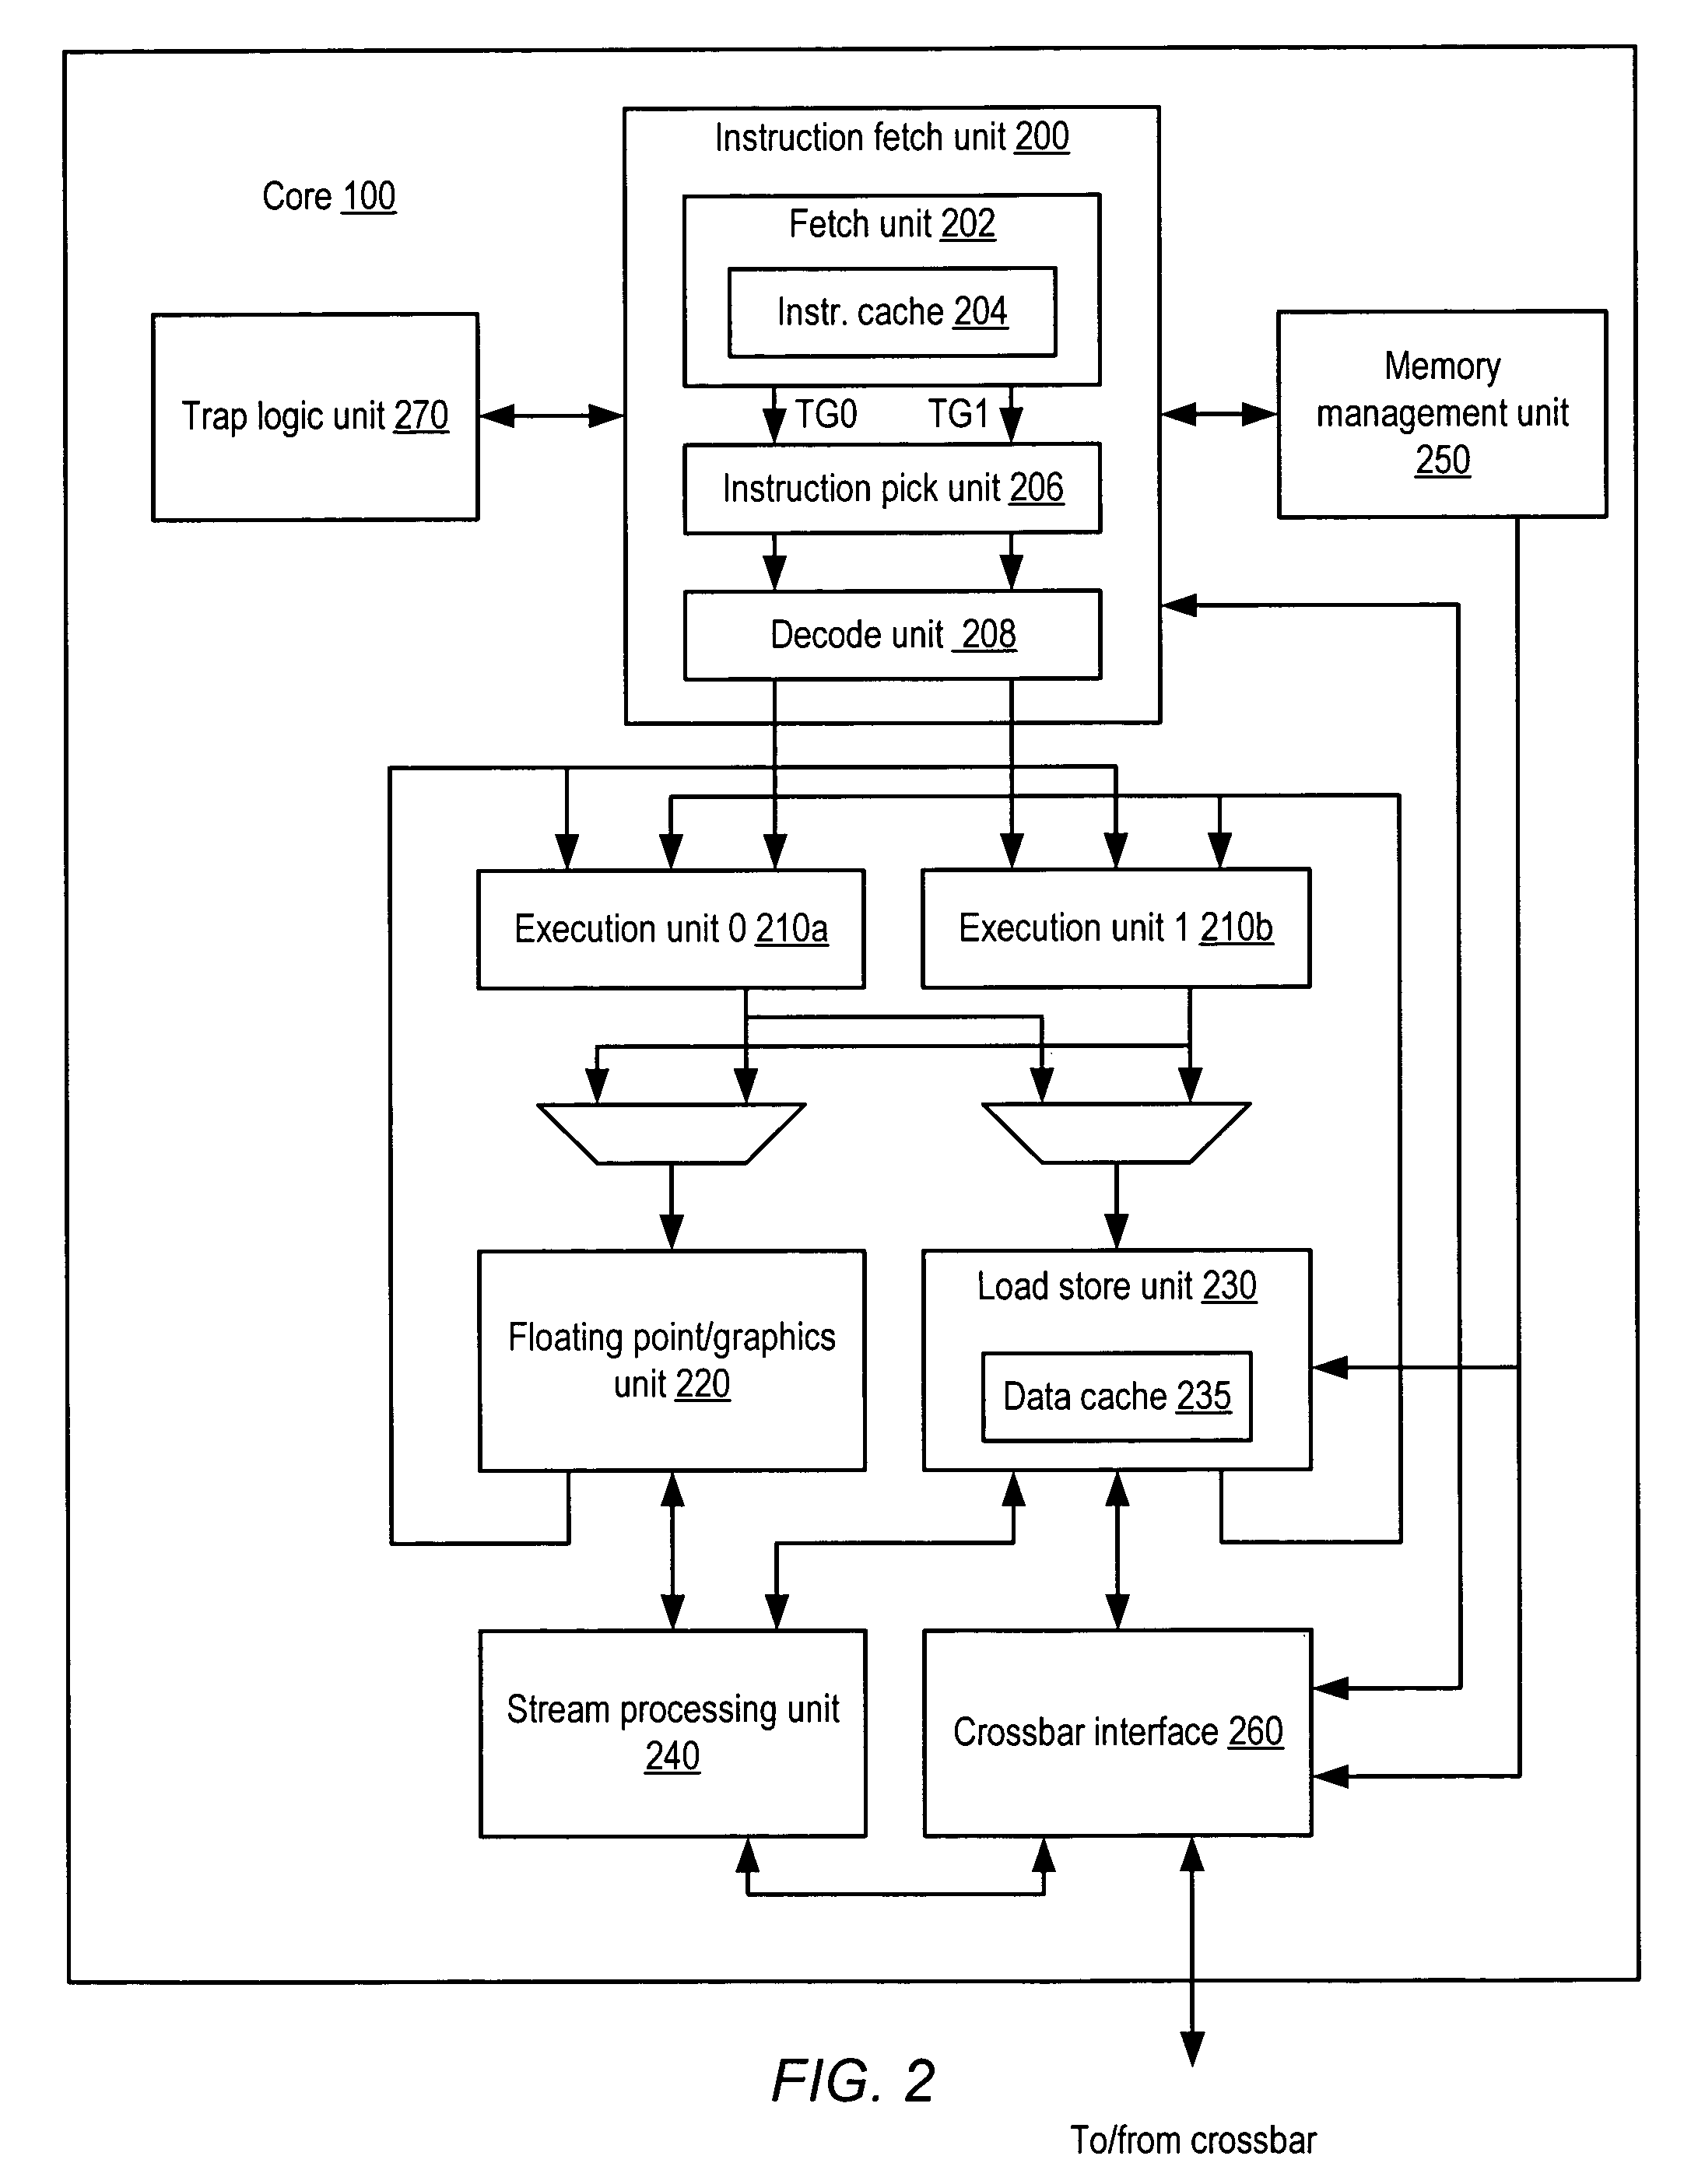 Apparatus and method to support pipelining of differing-latency instructions in a multithreaded processor